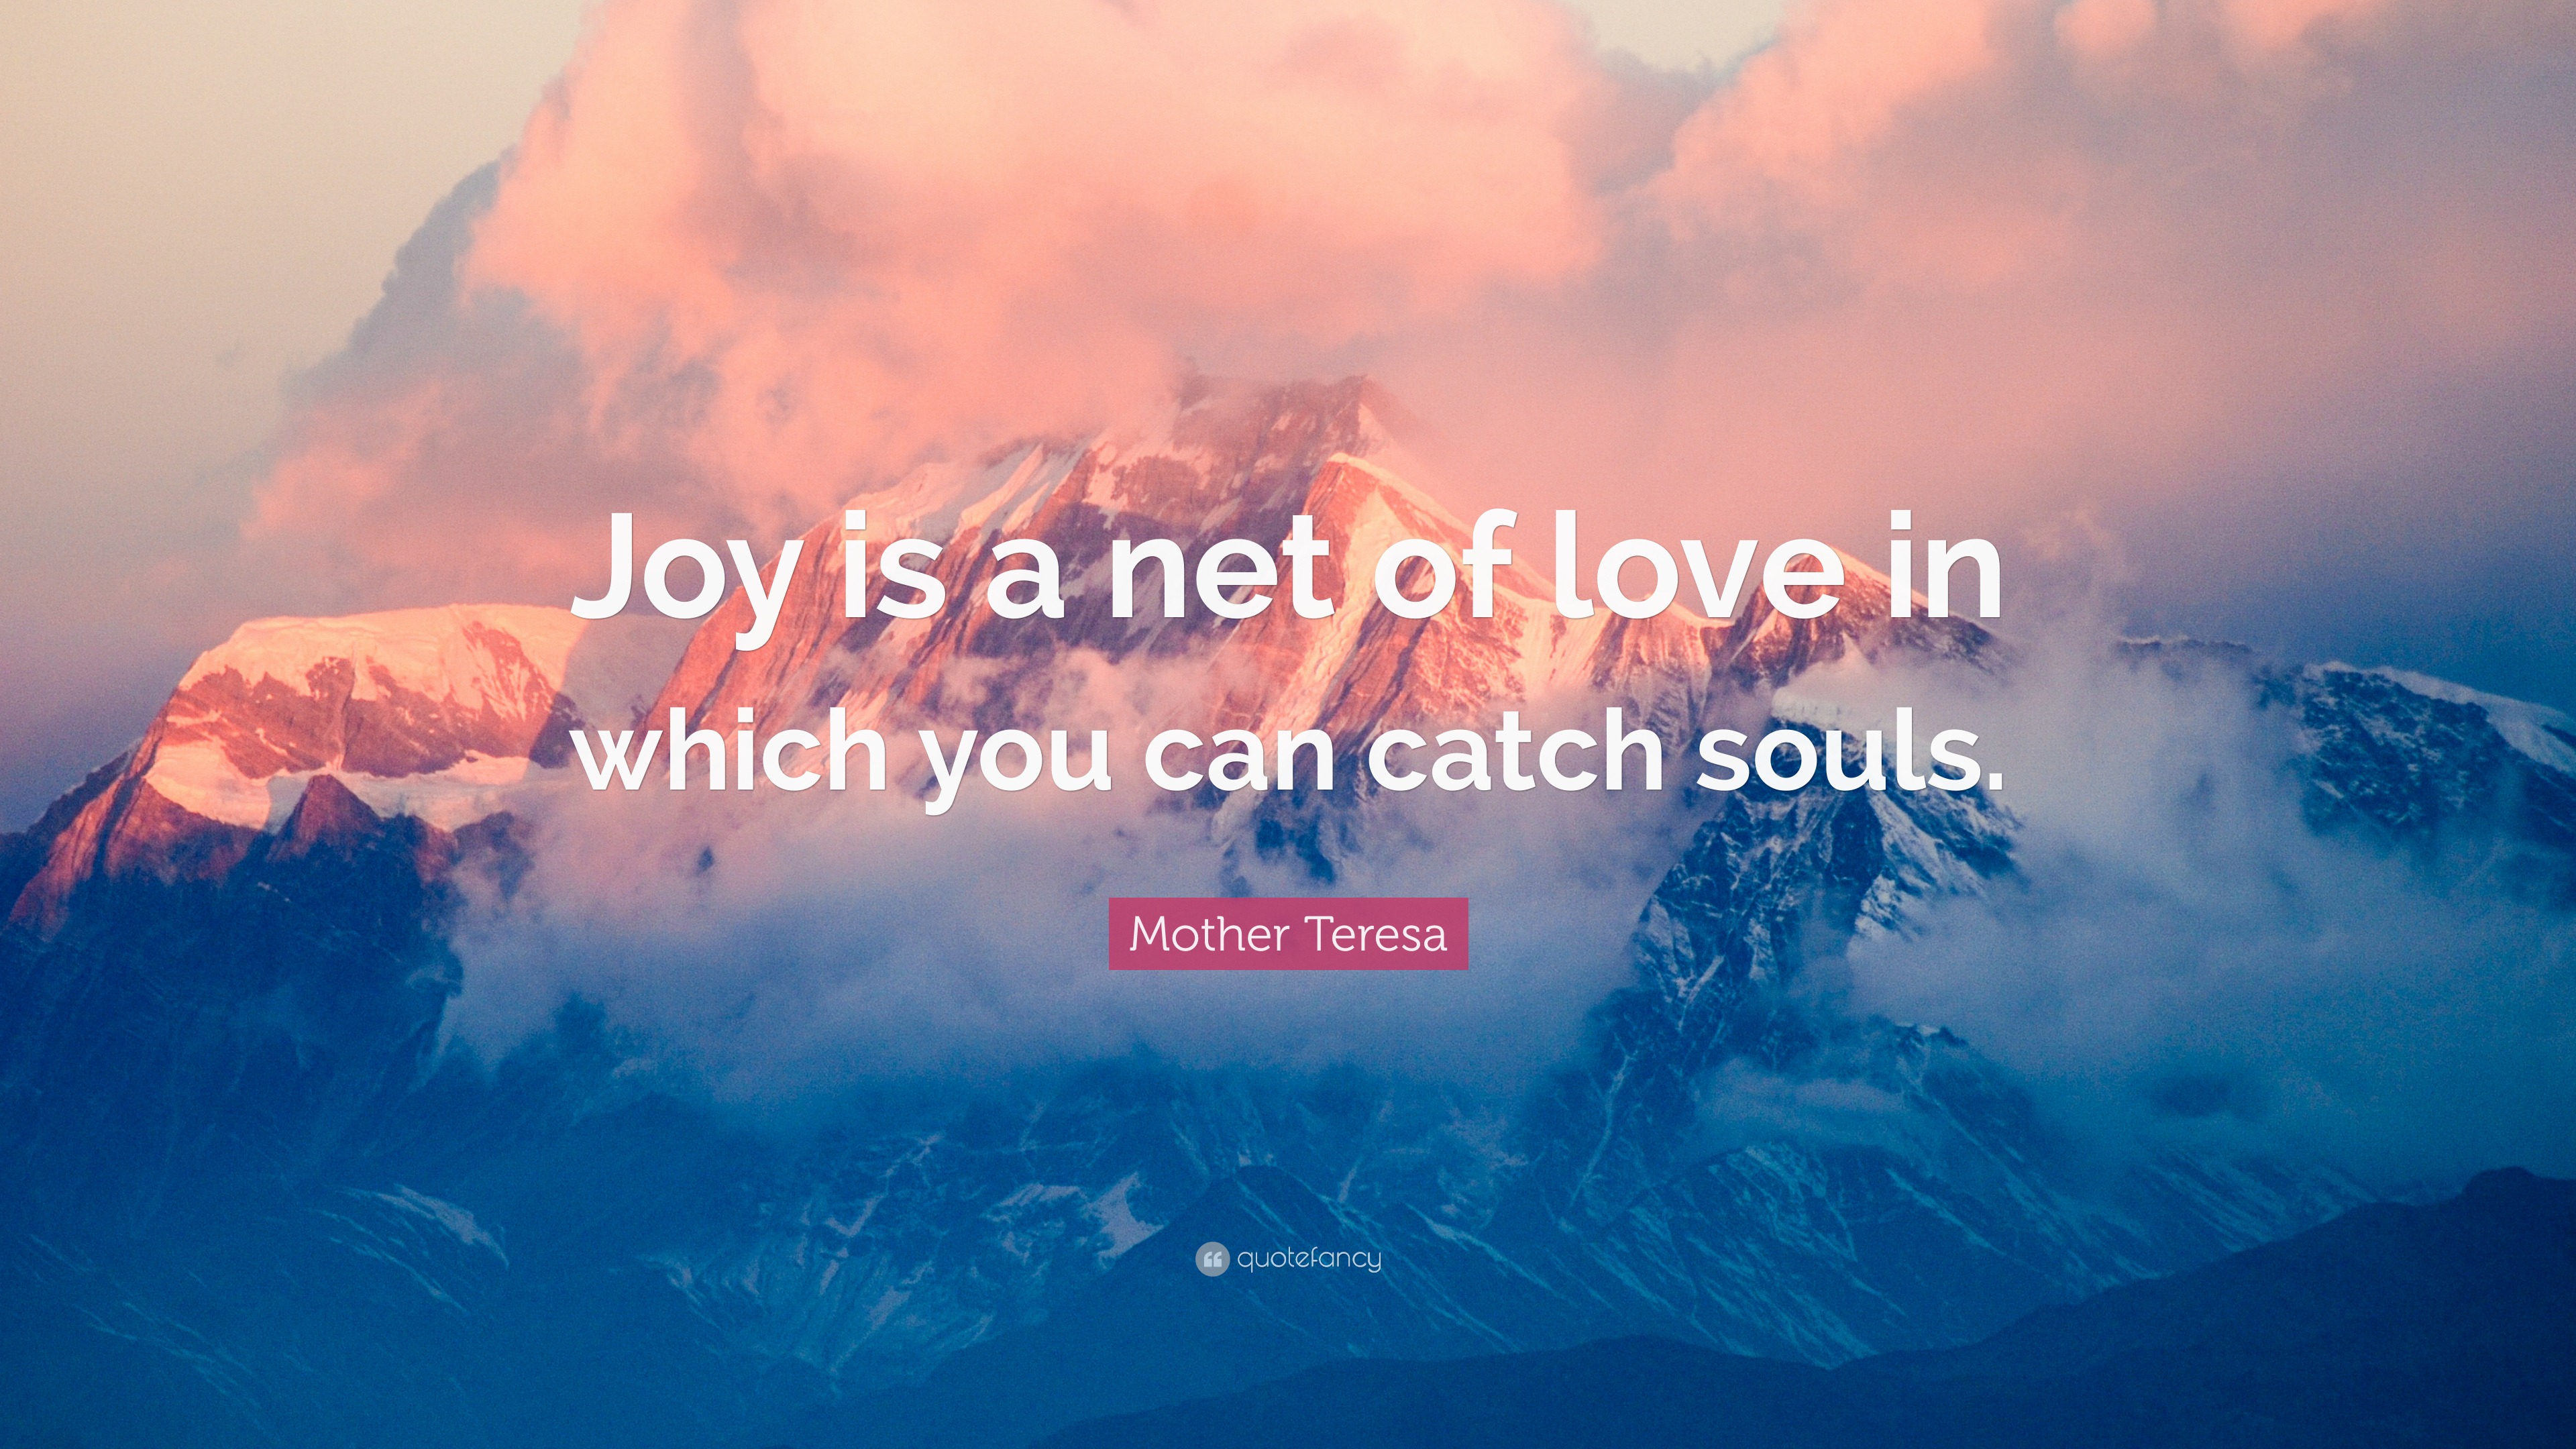 Mother Teresa Quote “Joy is a net of love in which you can catch